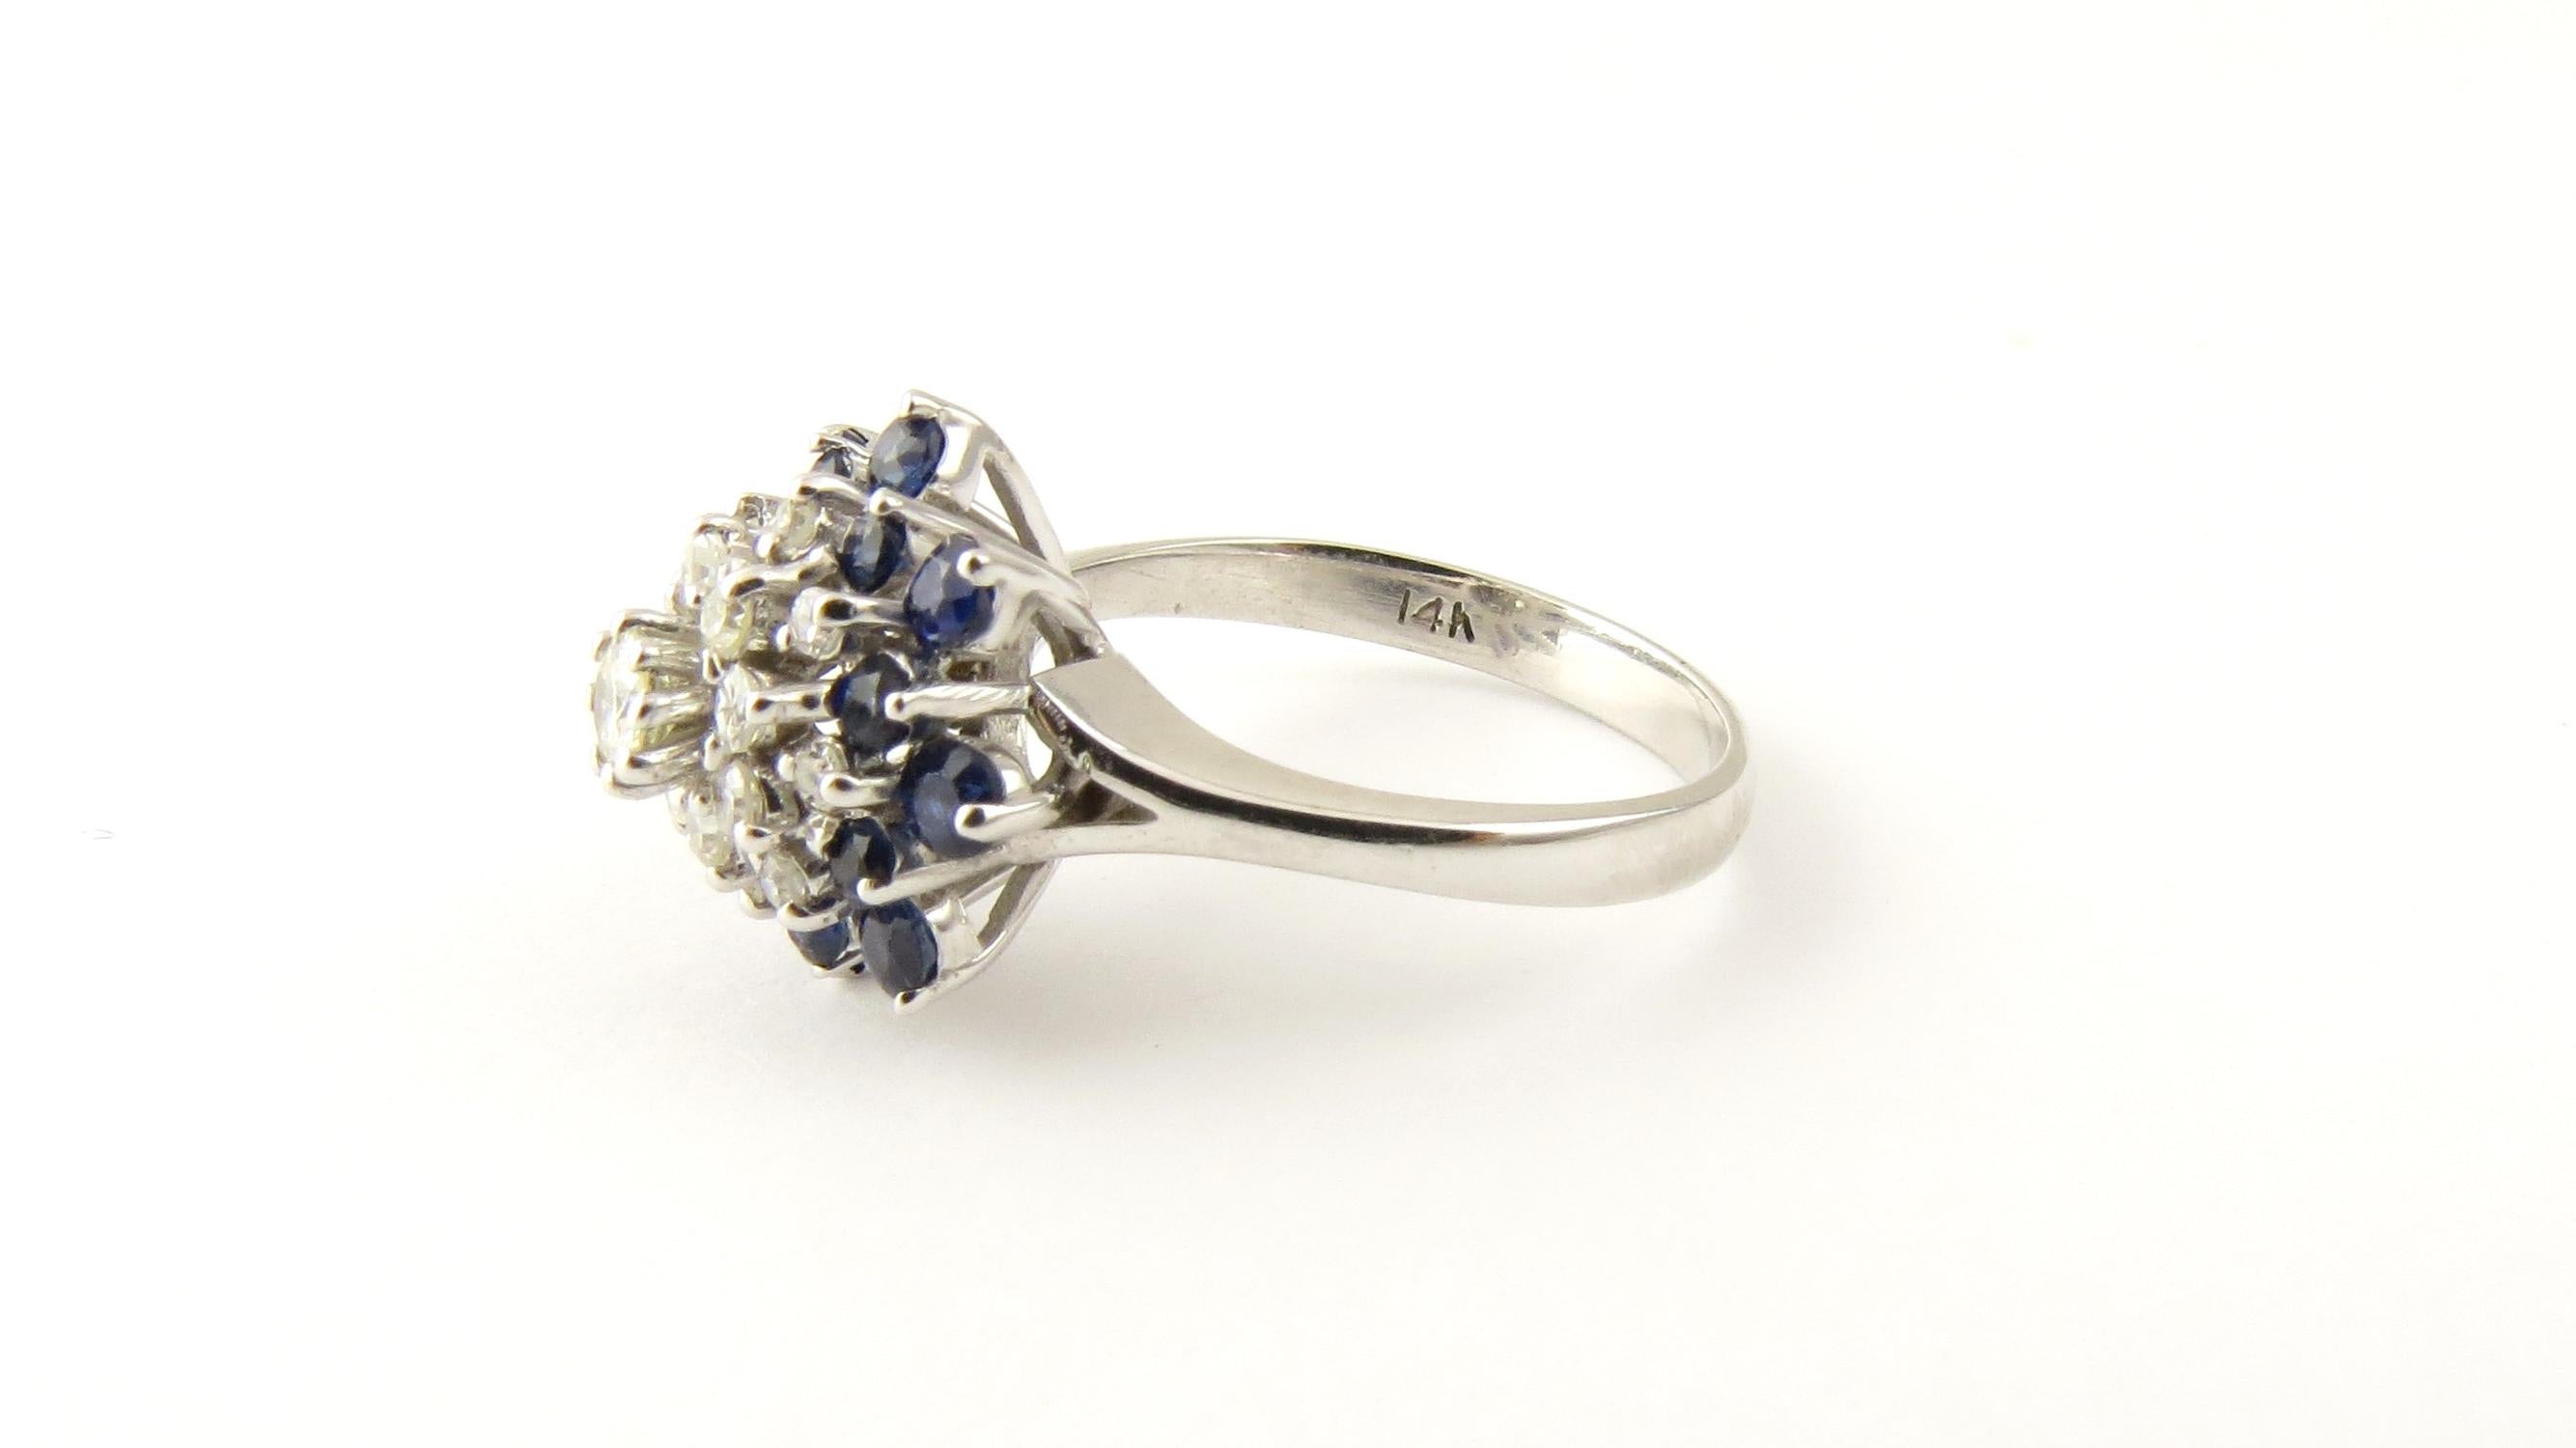 Vintage 14 Karat White Gold Sapphire and Diamond Ring Size 6.5

This stunning cluster ring features one round brilliant cut diamond in its center (.10 ct.) surrounded by 16 round single cut diamonds (.32 ct. twt.) and 16 round blue sapphires. Top of